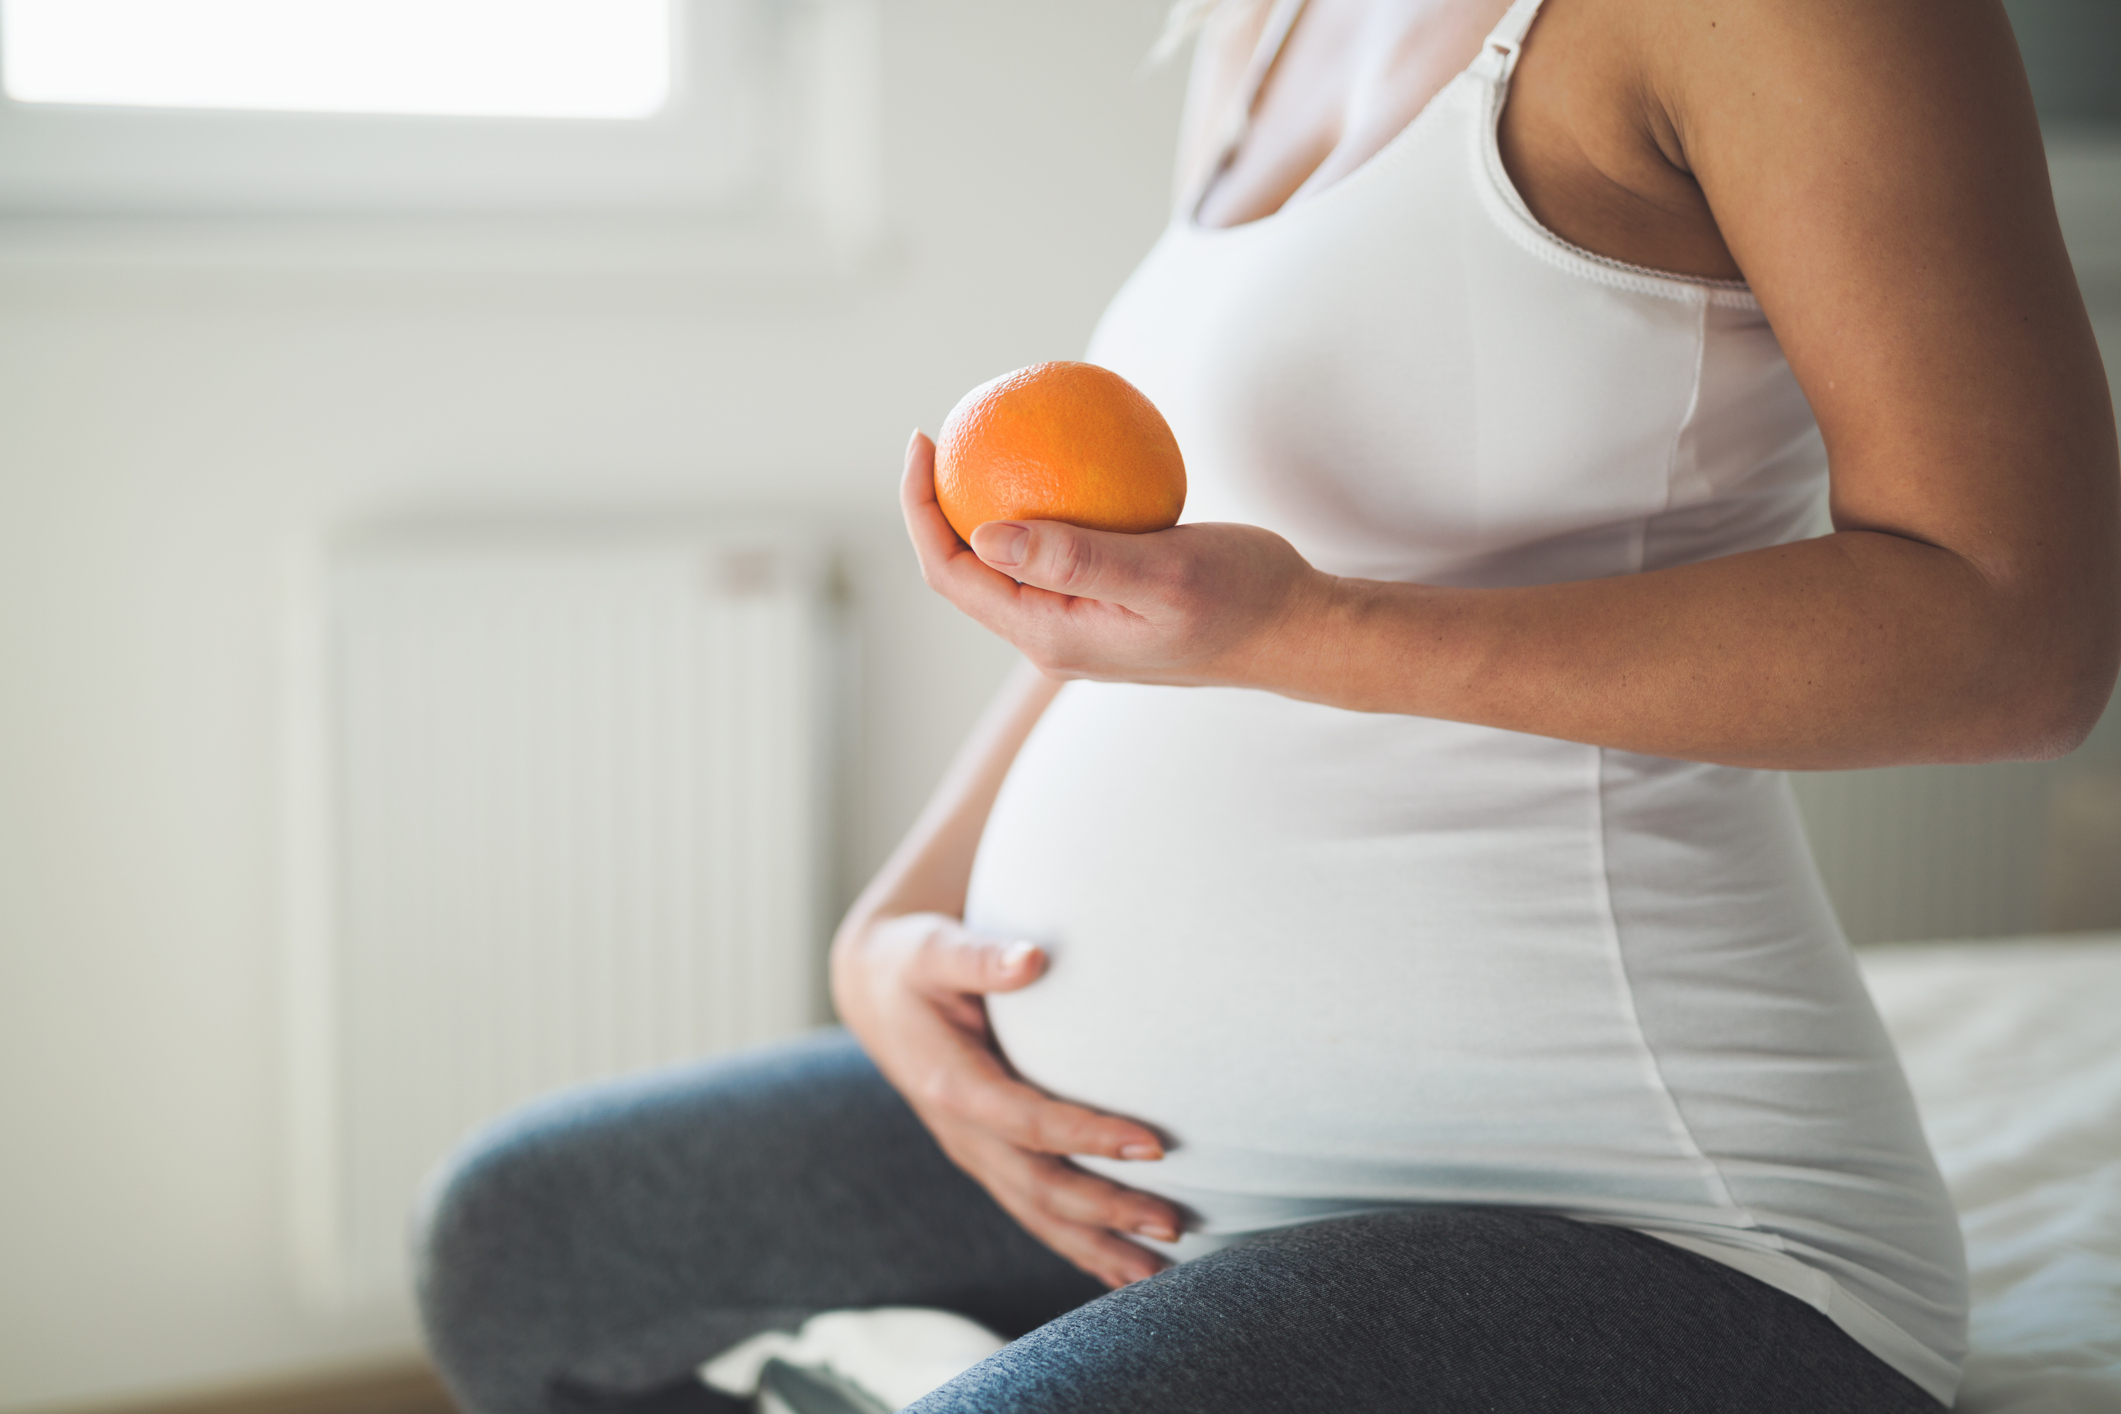 Pregnant woman having a healthy diet and eating fruit